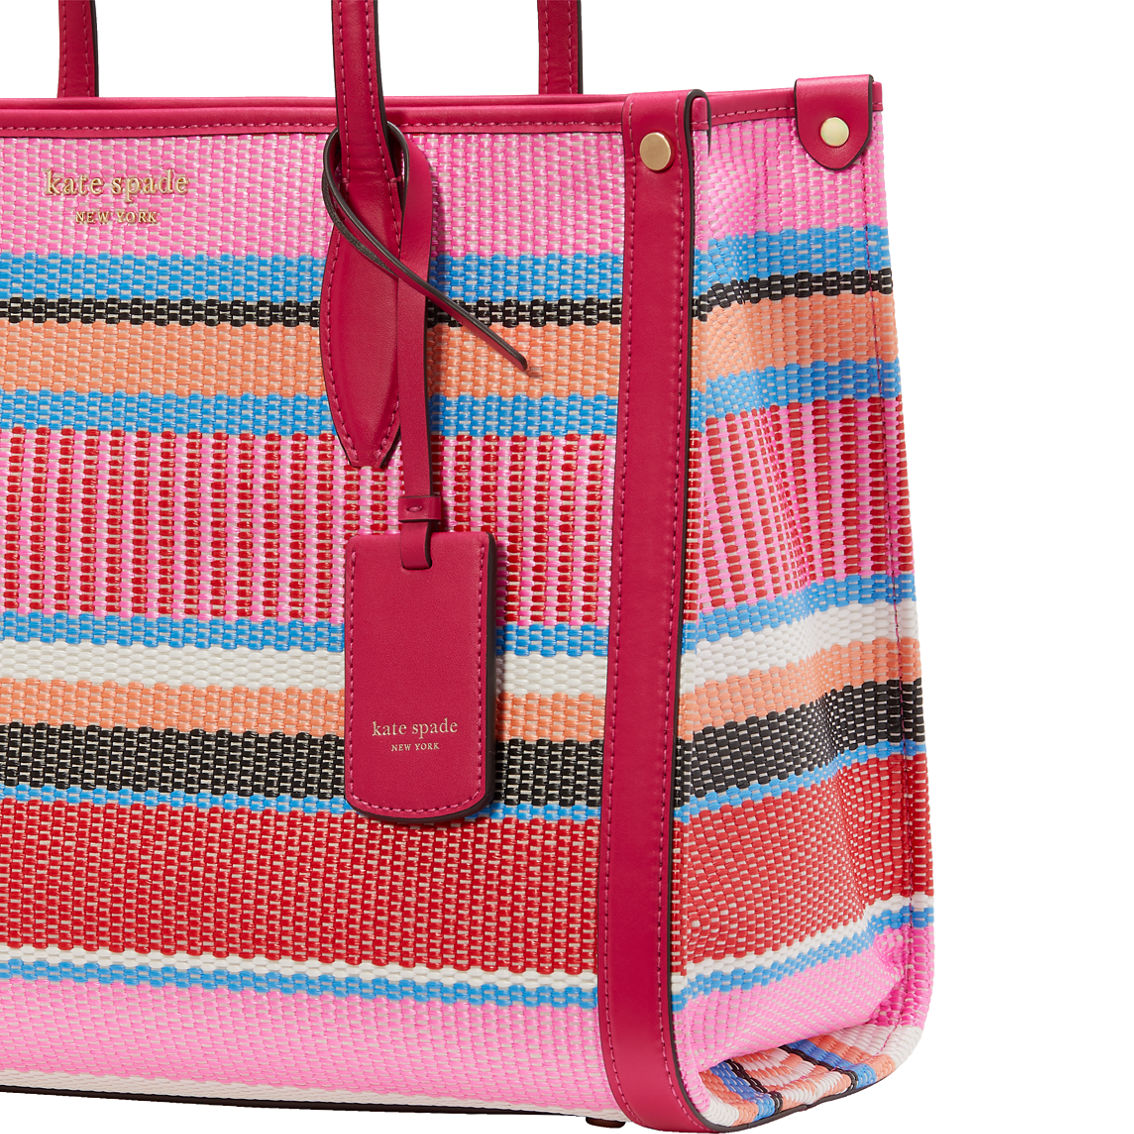 Kate Spade Market Striped Woven Straw Medium Tote - Image 5 of 5